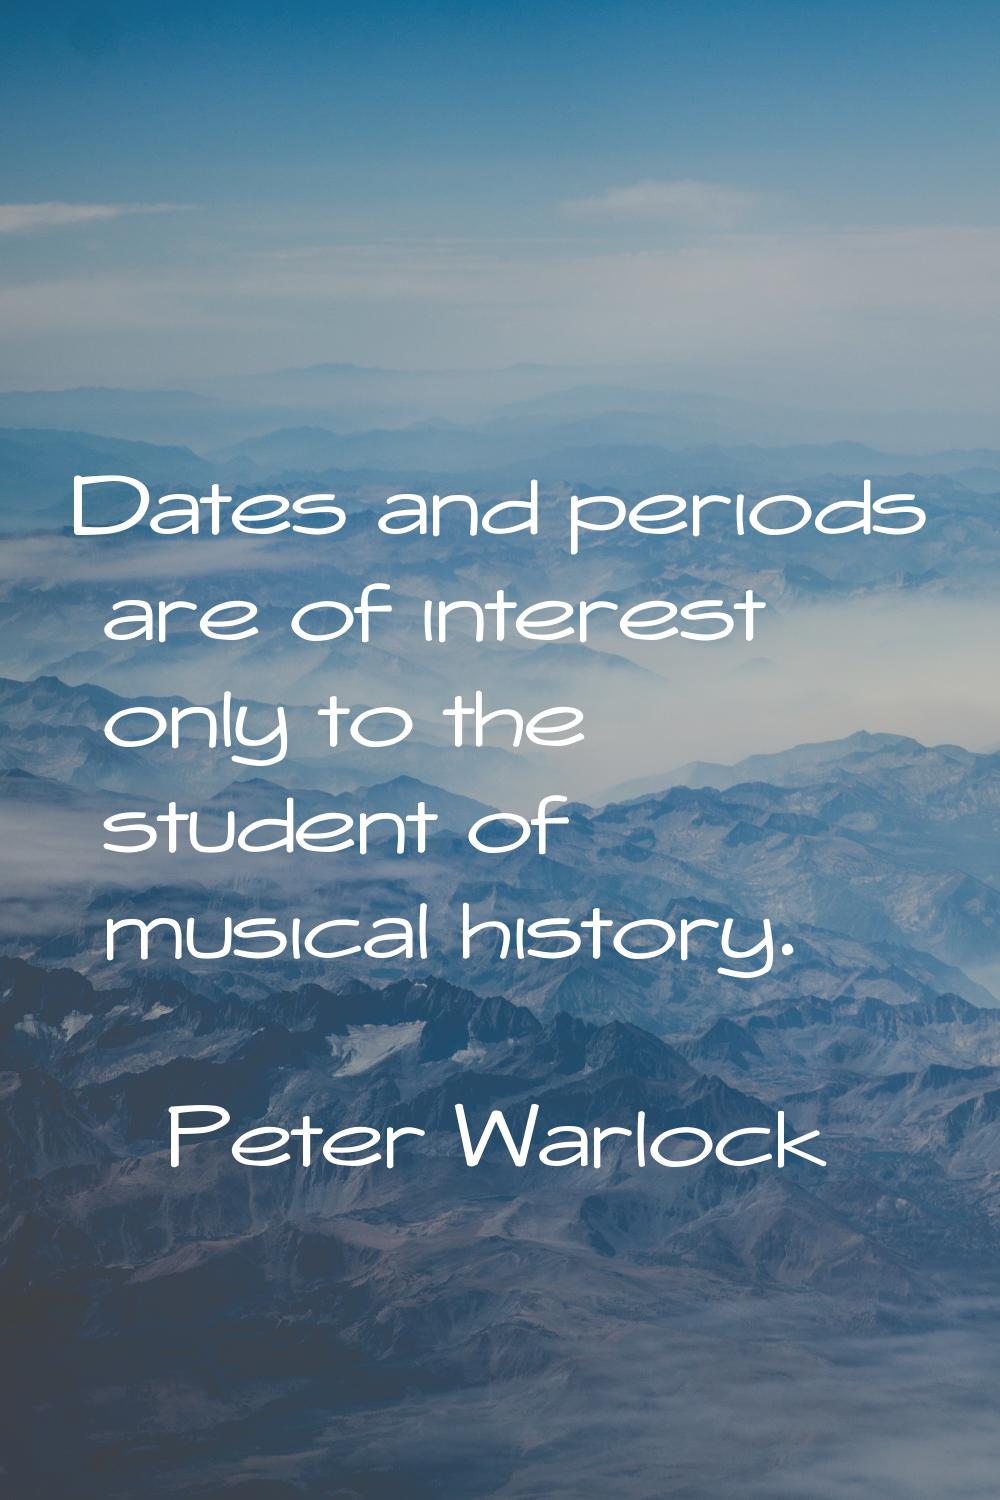 Dates and periods are of interest only to the student of musical history.